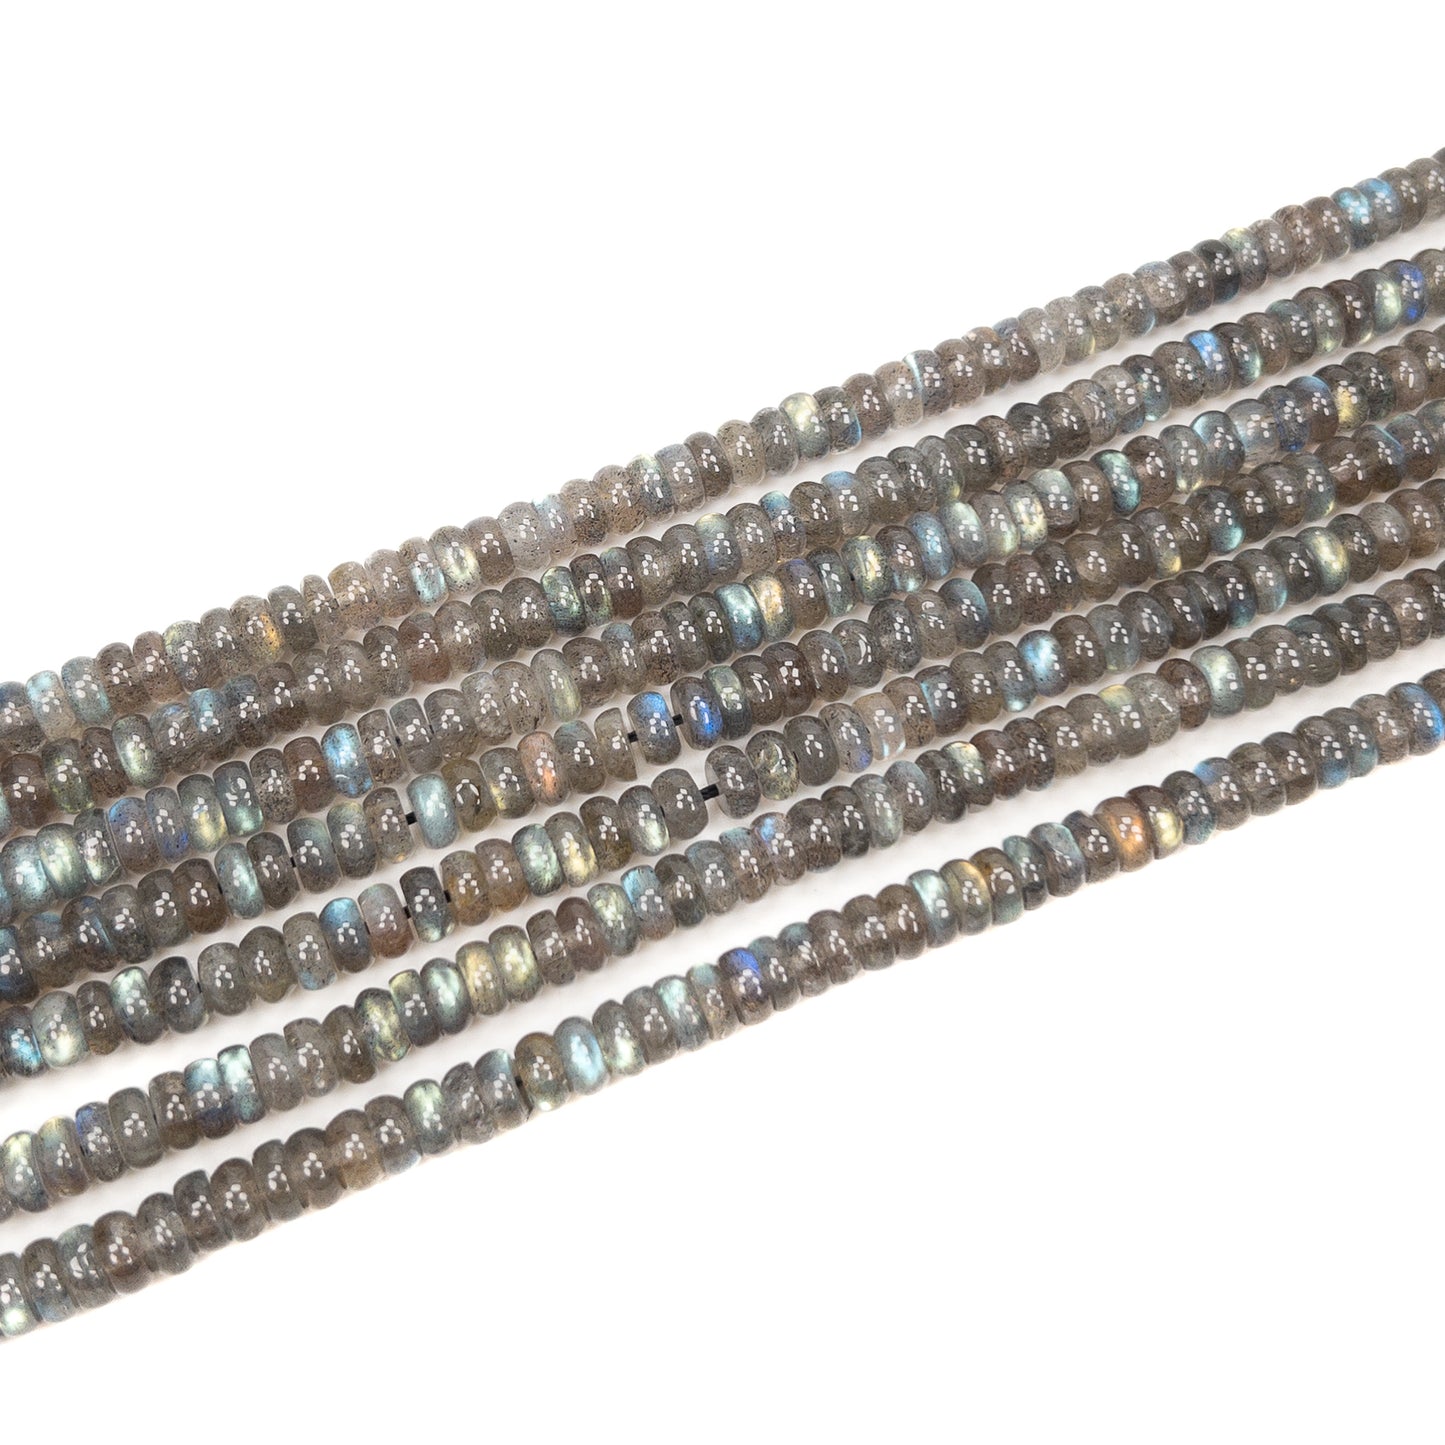 Labradorite 7mm Smooth Slice Bead (2 Quantities Available)